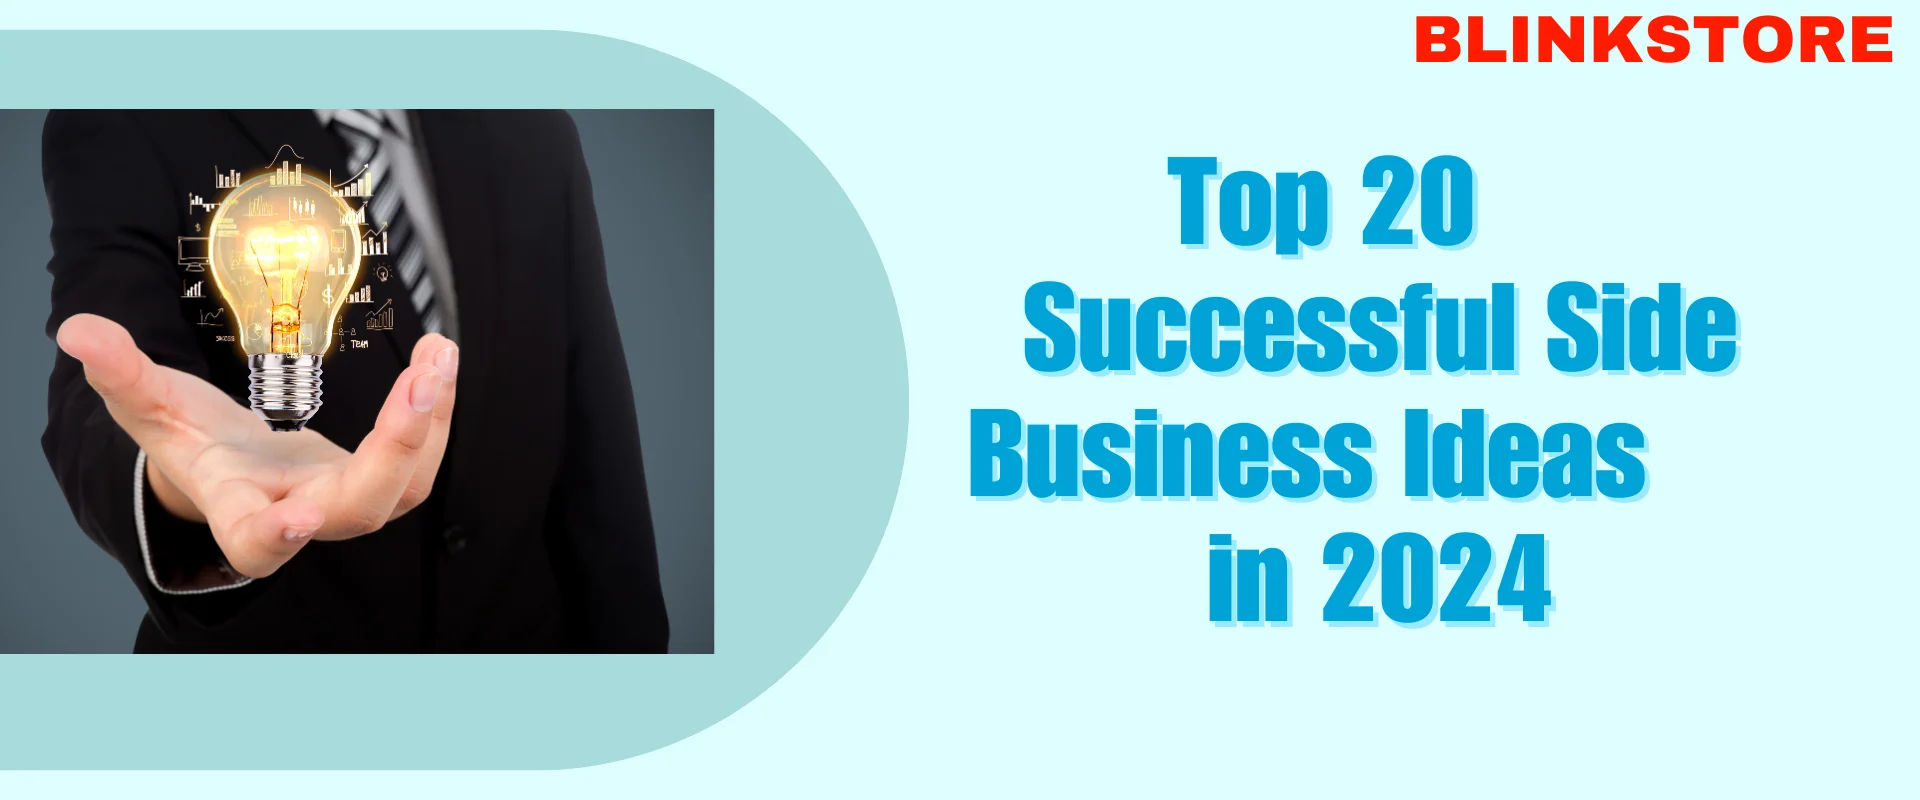 Top 20 Successful Side Business Ideas in 2024